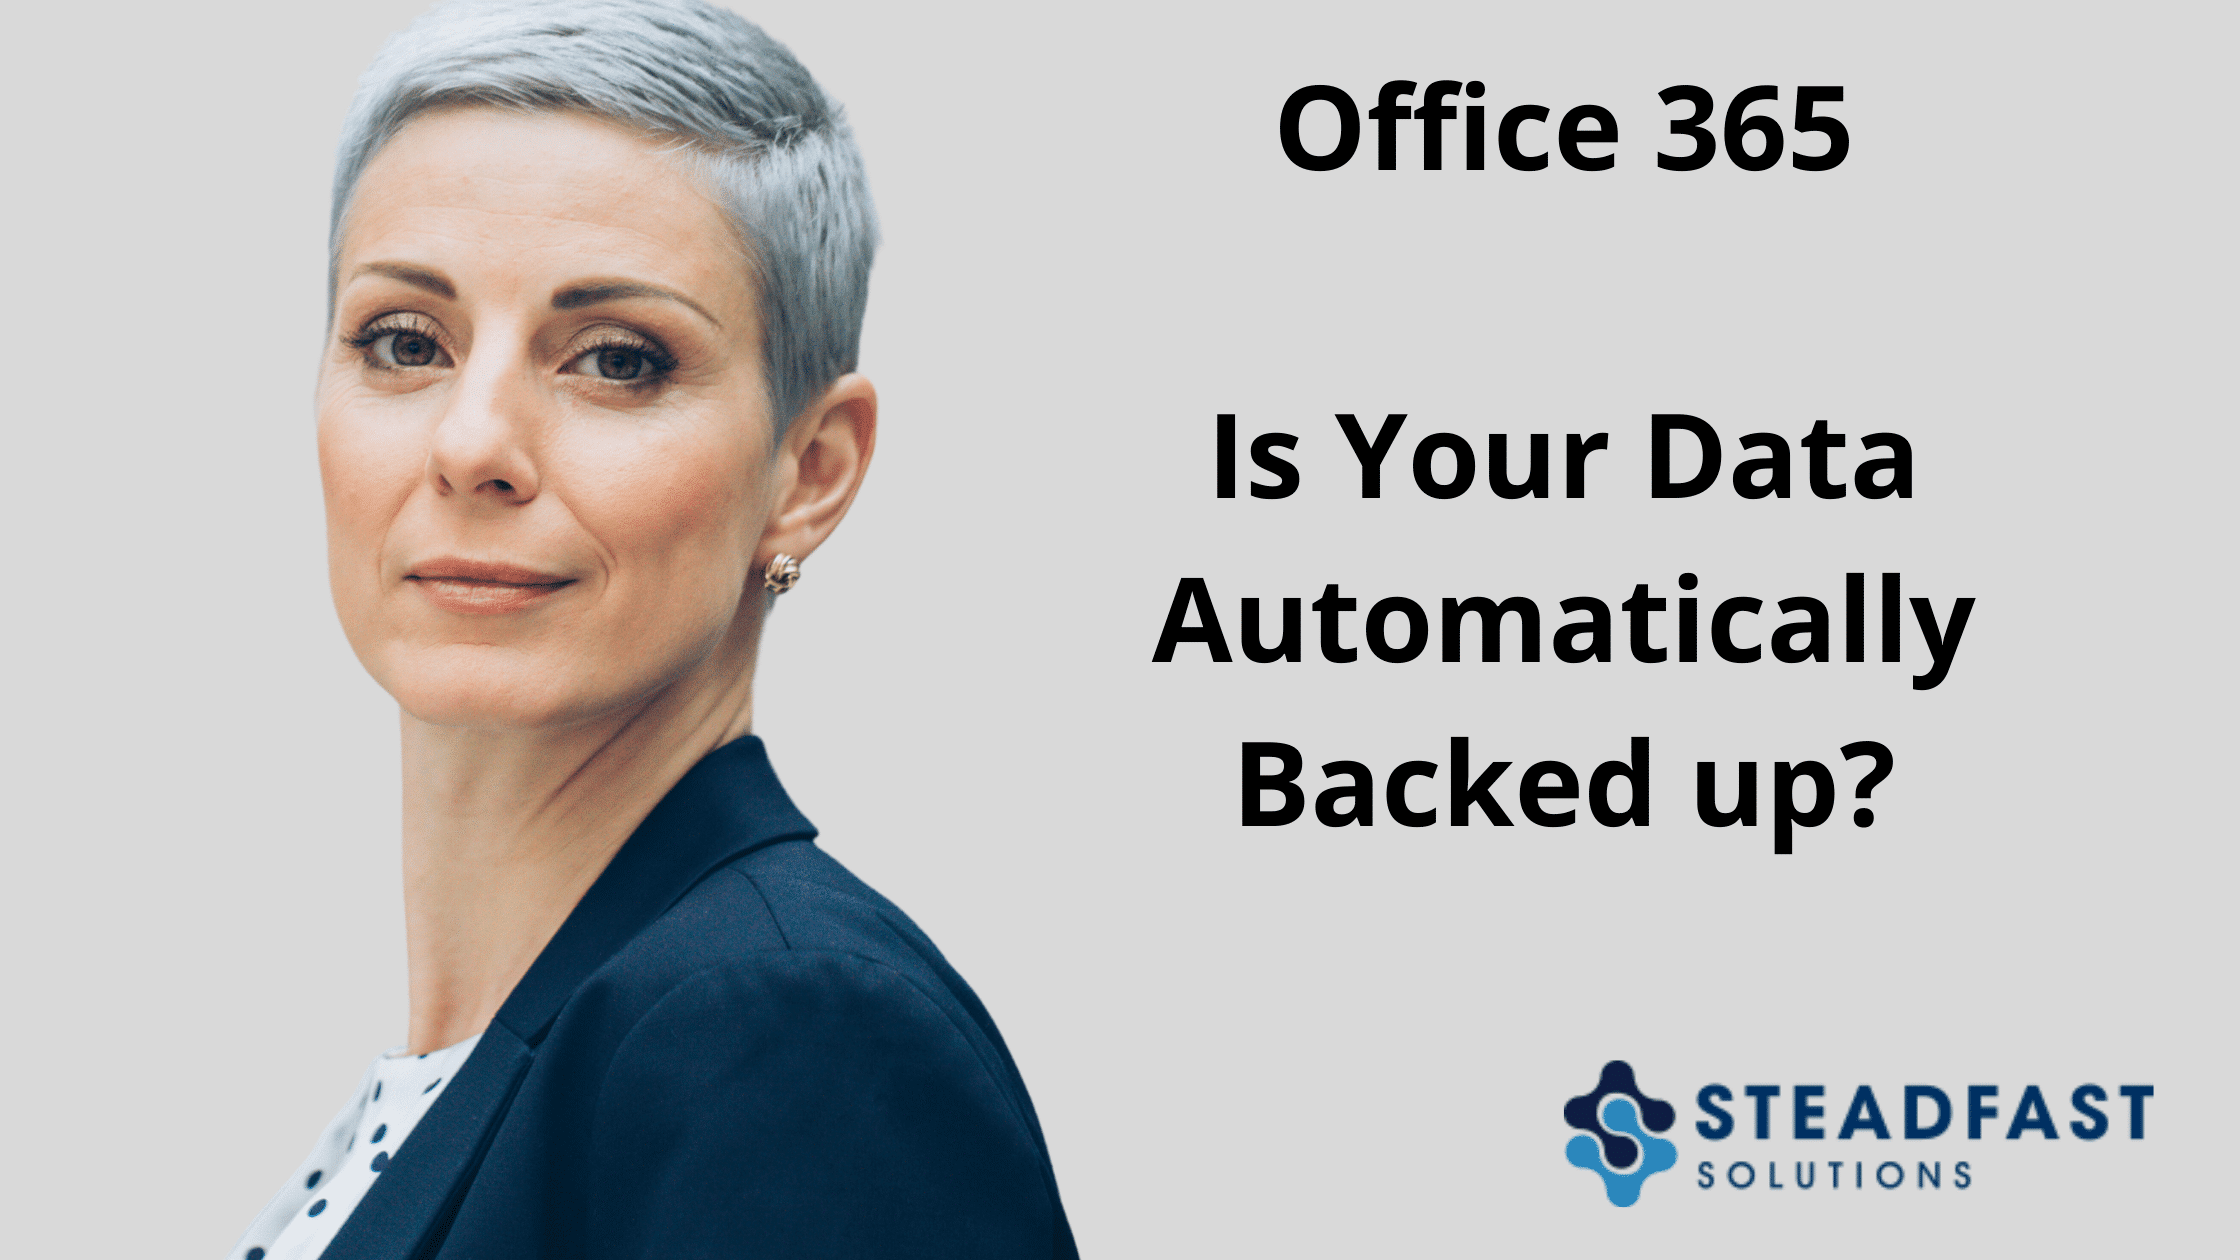 Office 365 is Your Data Automatically Backed up